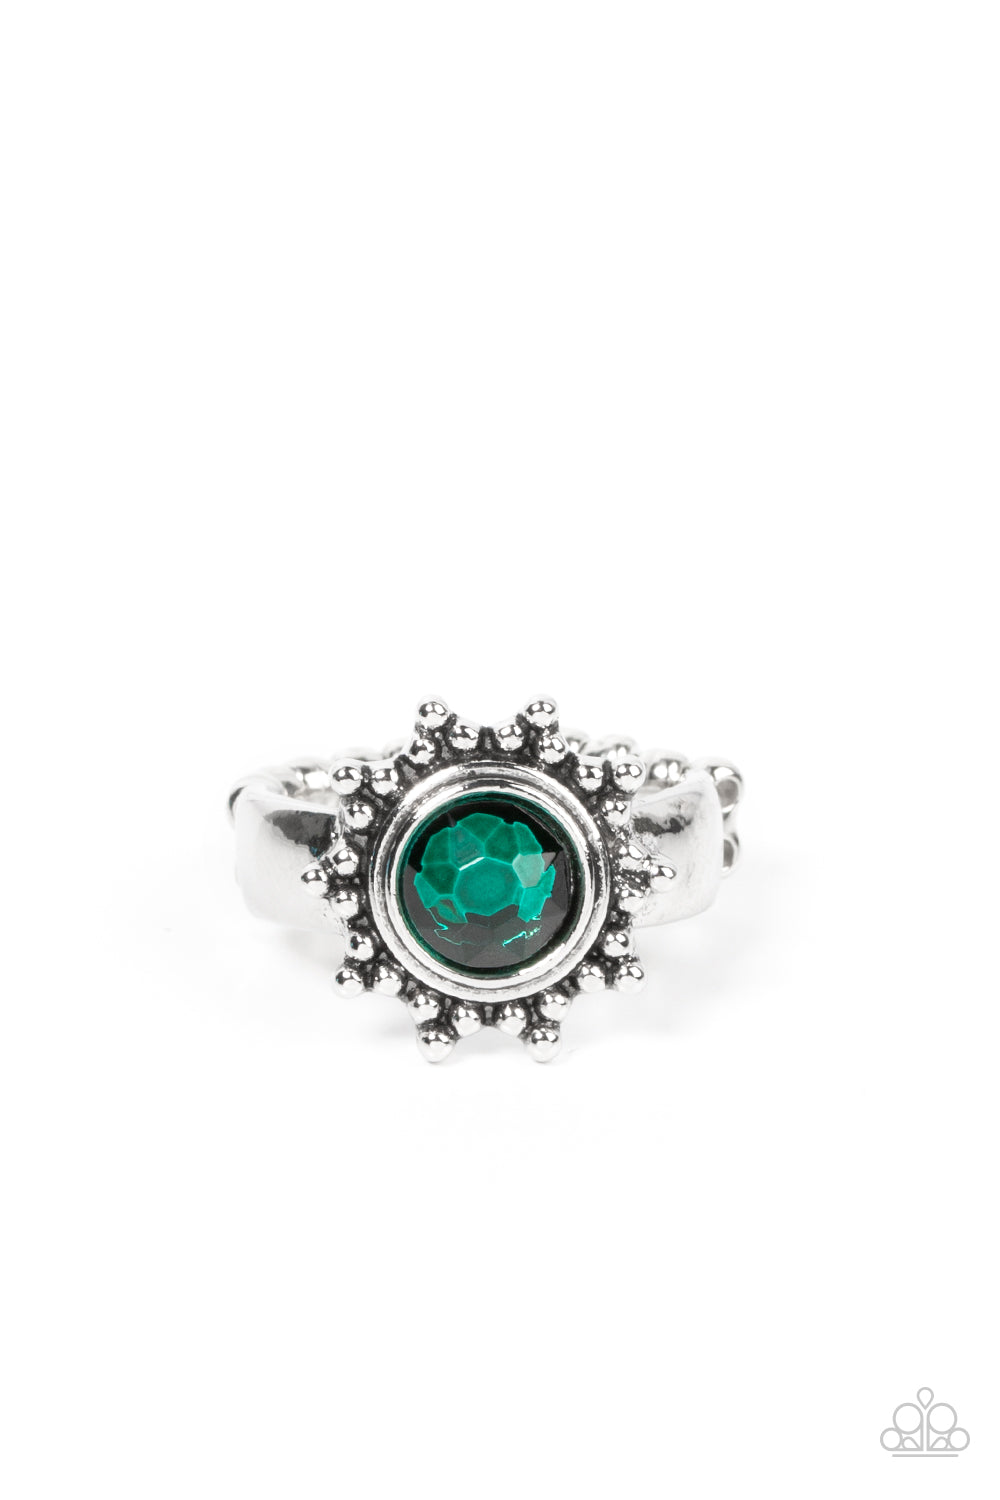 Paparazzi Rings - Expect Sunshine and Reign - Green